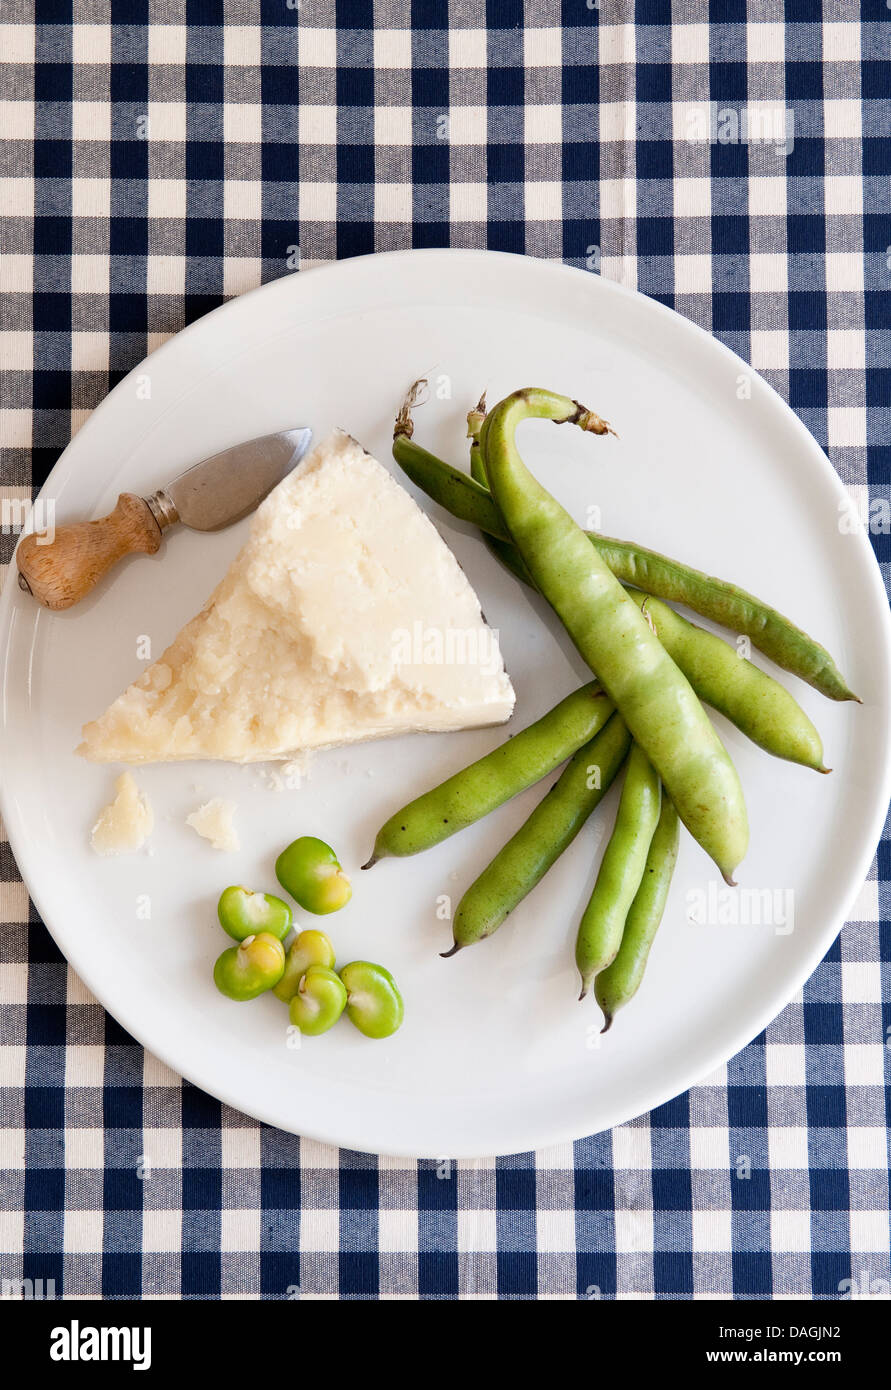 Roman cuisine, Pecorino cheese with fresh broad beans, (fave beans) served in the spring, Italy Stock Photo